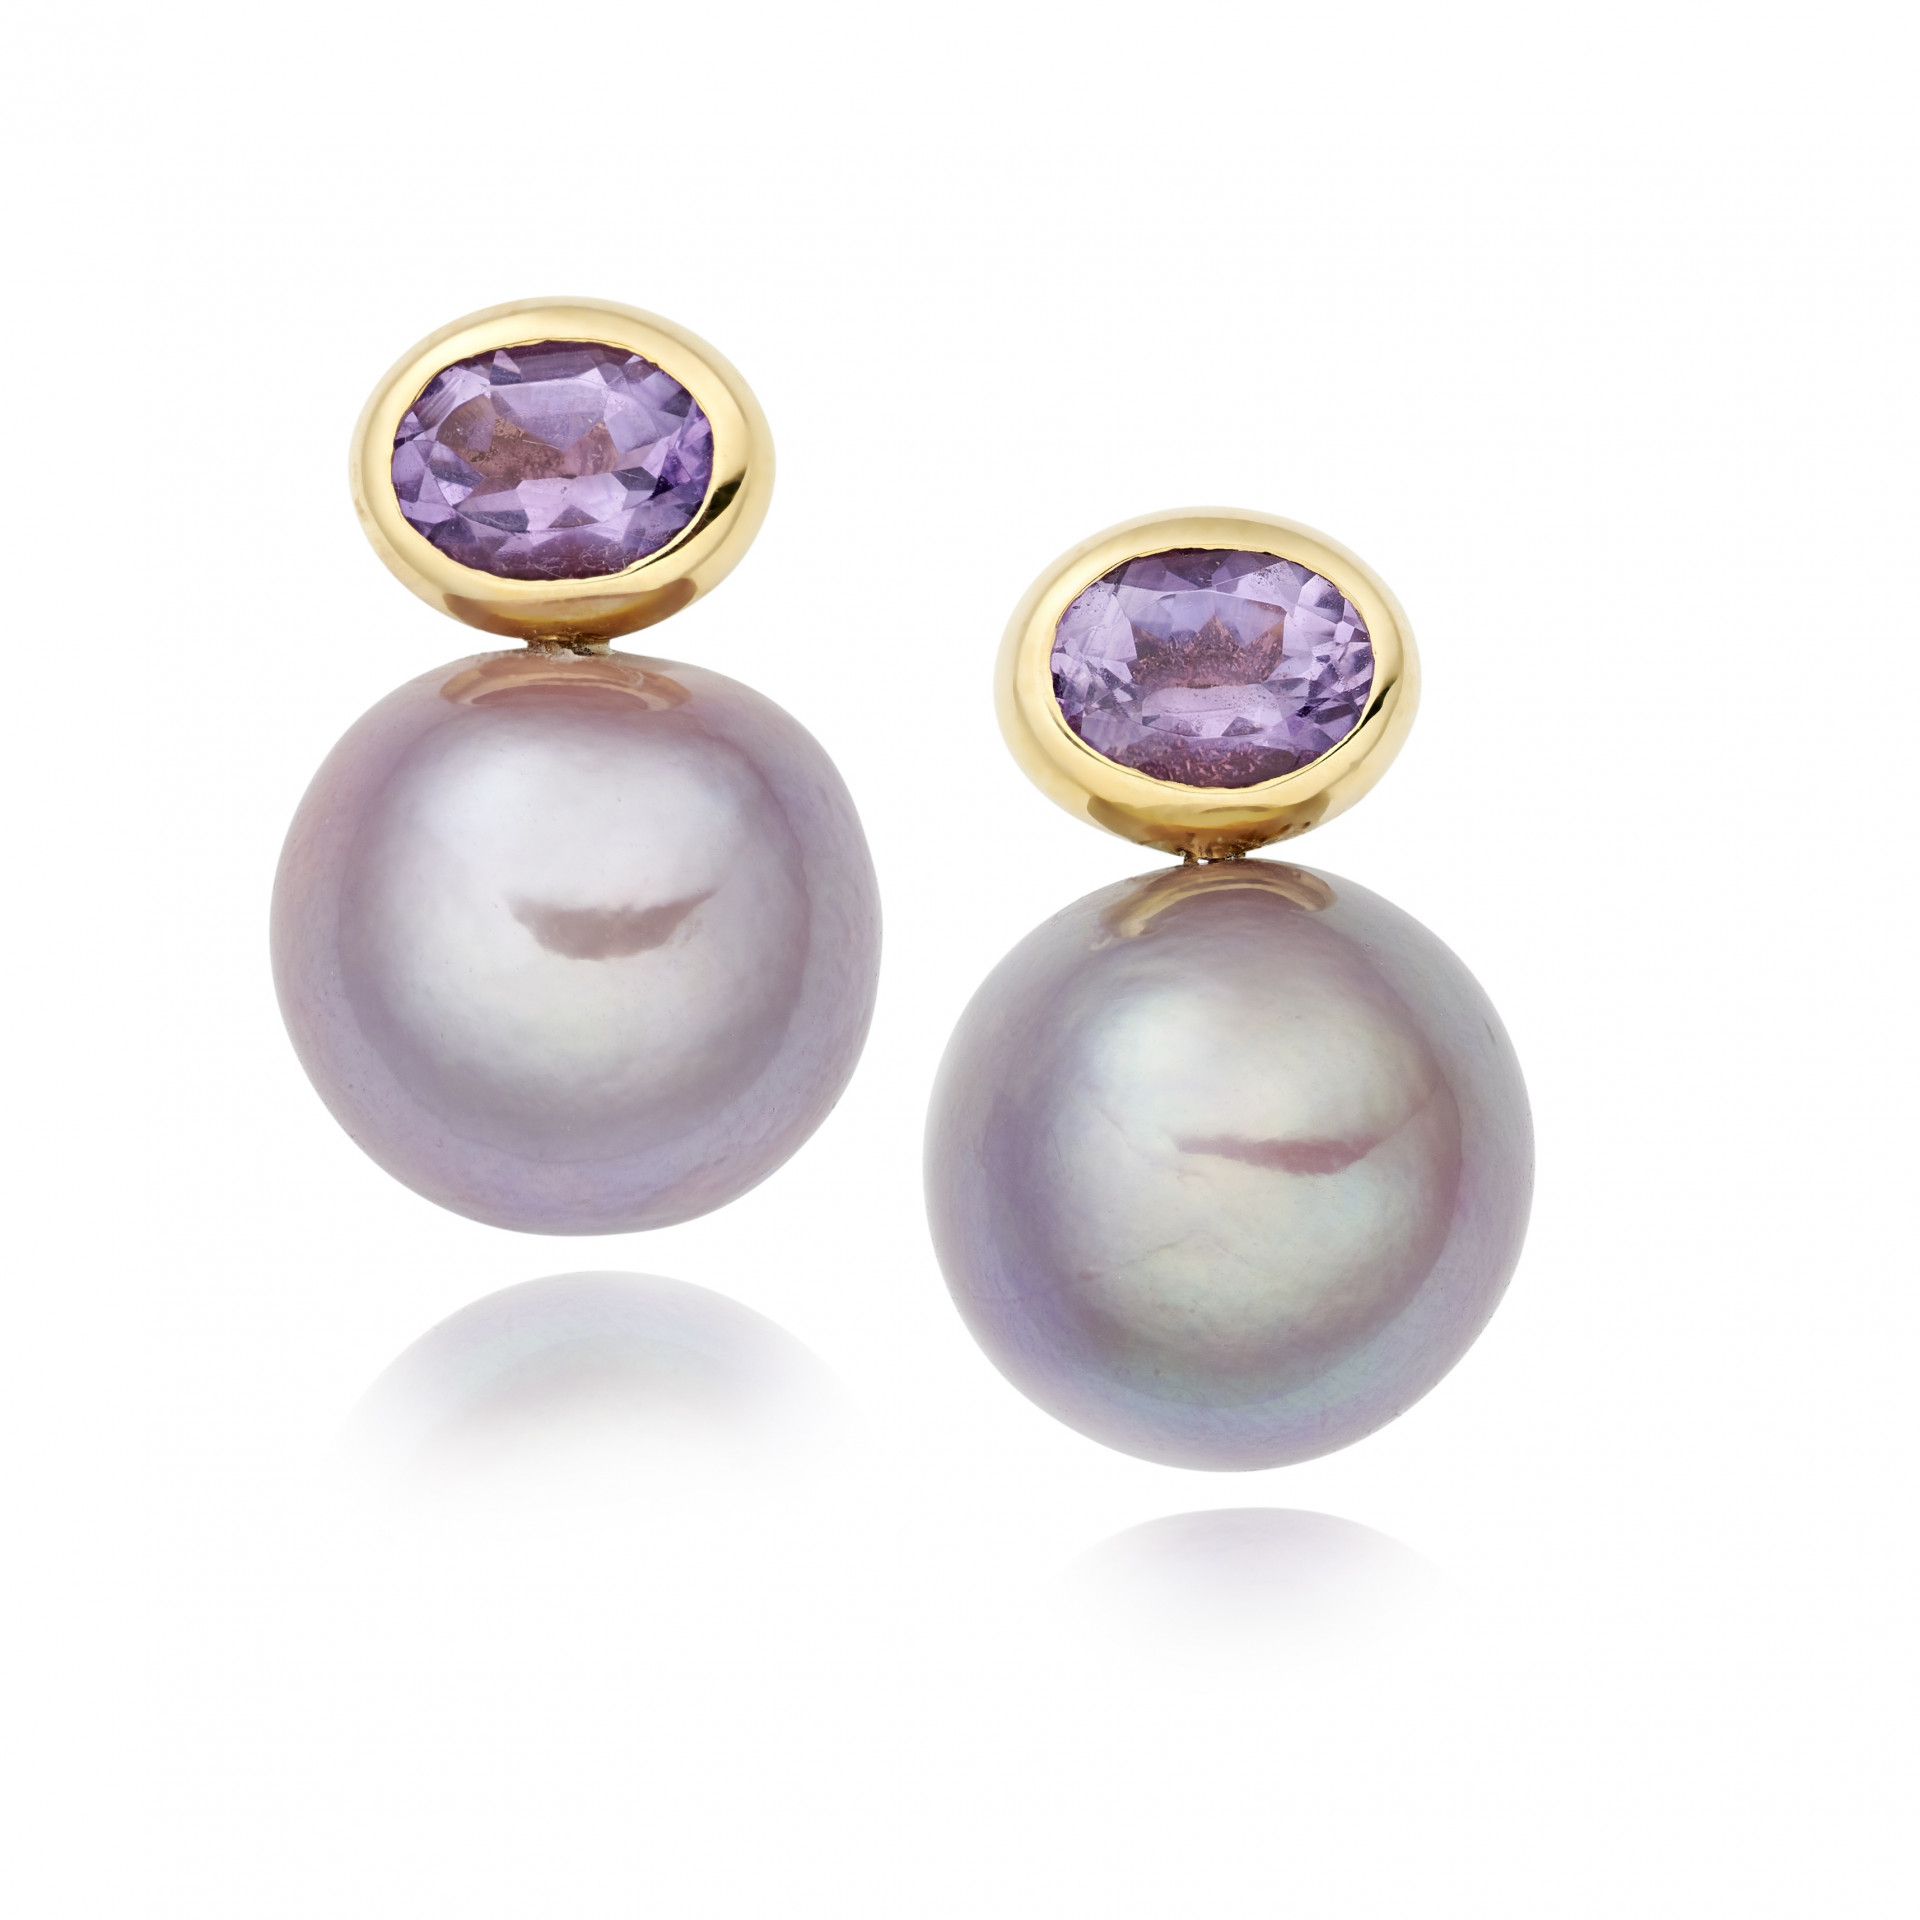 Pearl Jewelry - 2-Piece Set of 8 - 8.5mm White Cultured Freshwater Pearl,  Diamond, Tanzantie & Amethyst Stud Earrings & Ring in Sterling Silver -  Discounts for Veterans, VA employees and their